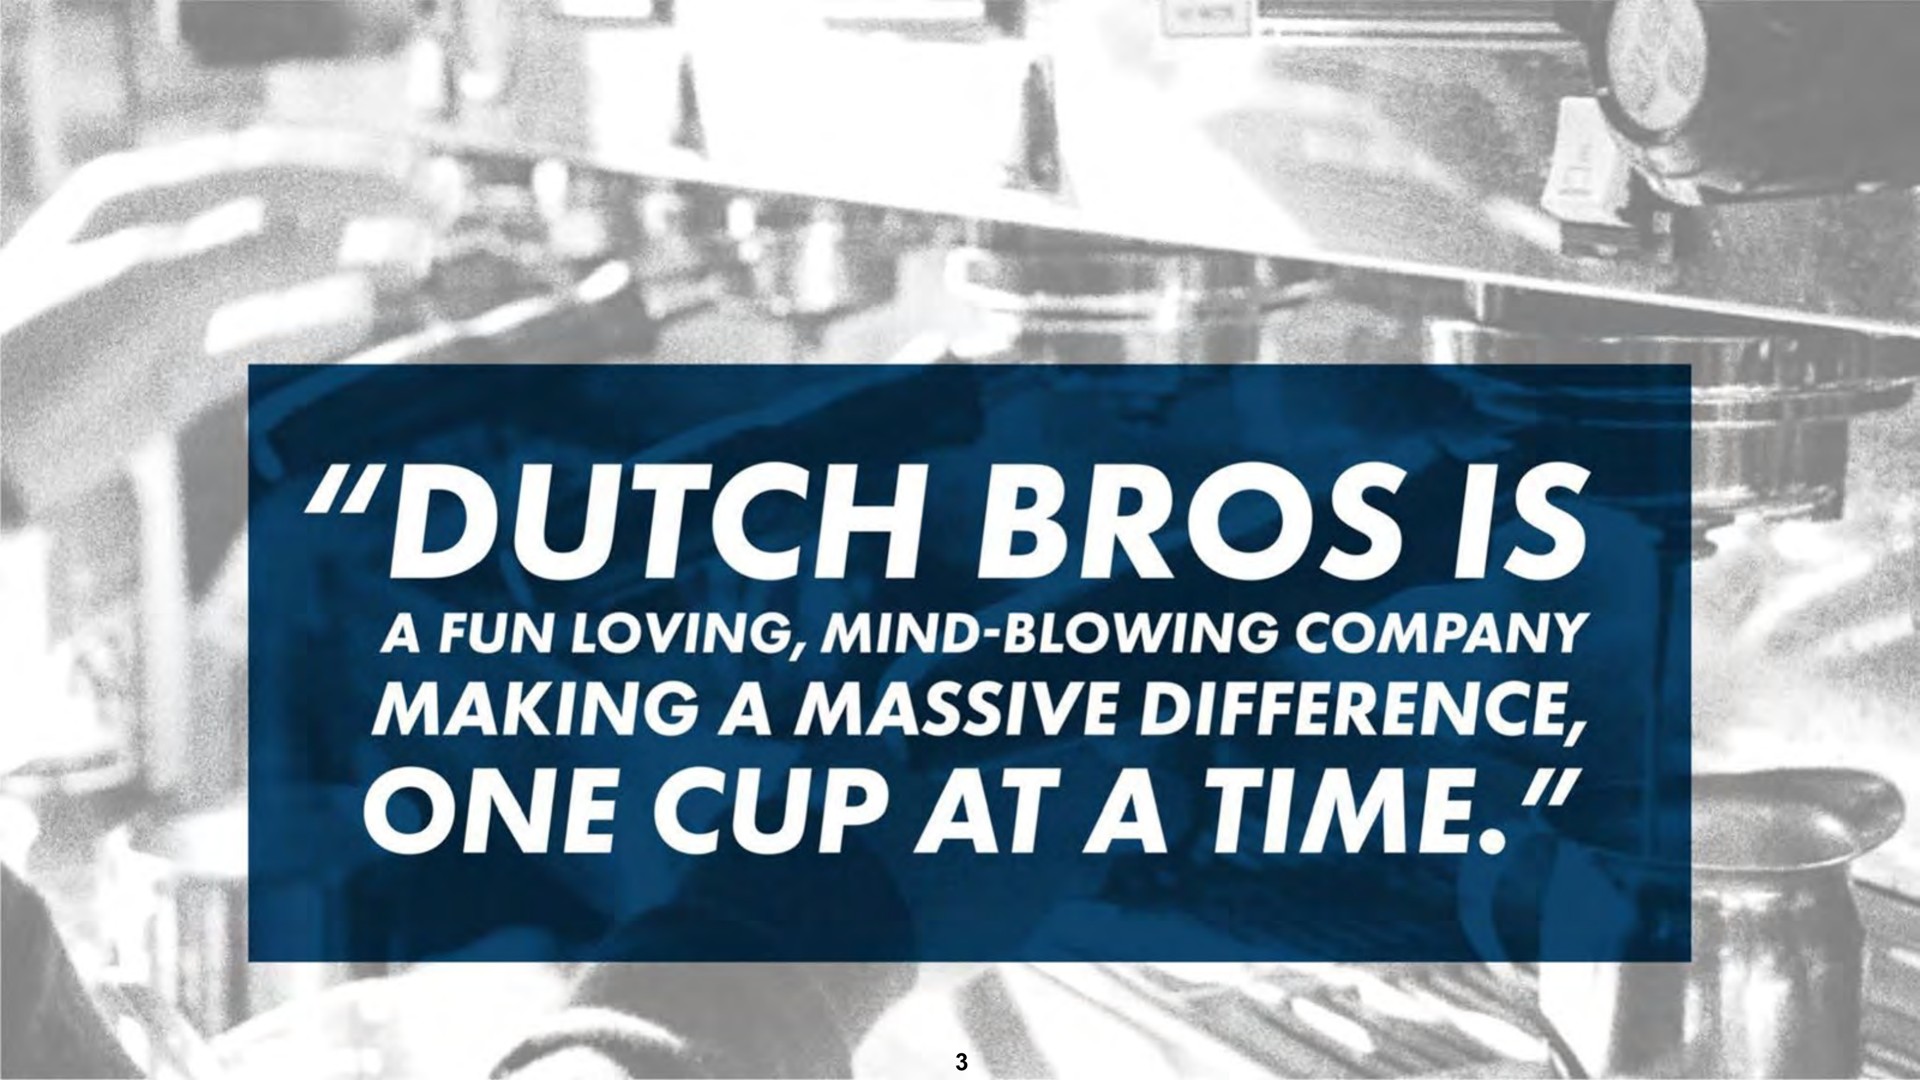 dutch is one cup at a time a fun loving mind blowing company making a massive difference | Dutch Bros